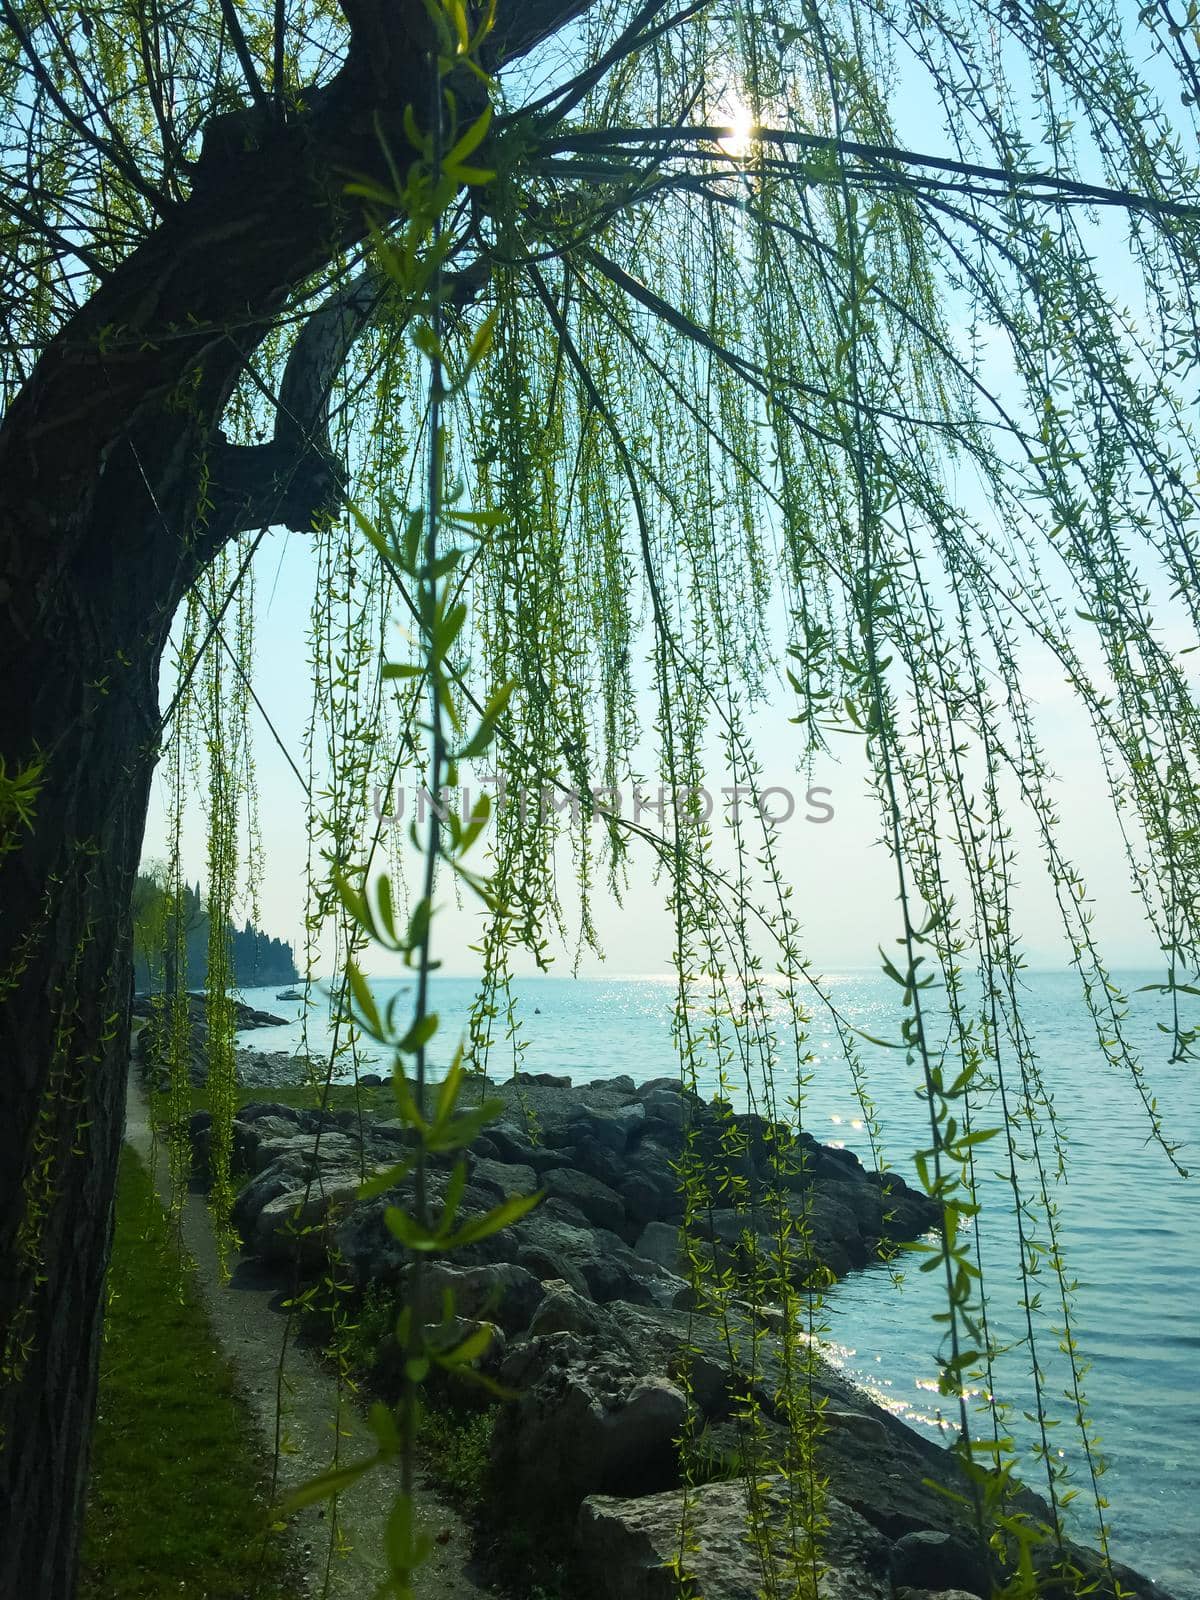 Witch willow tree in lake bank, summer, Italy